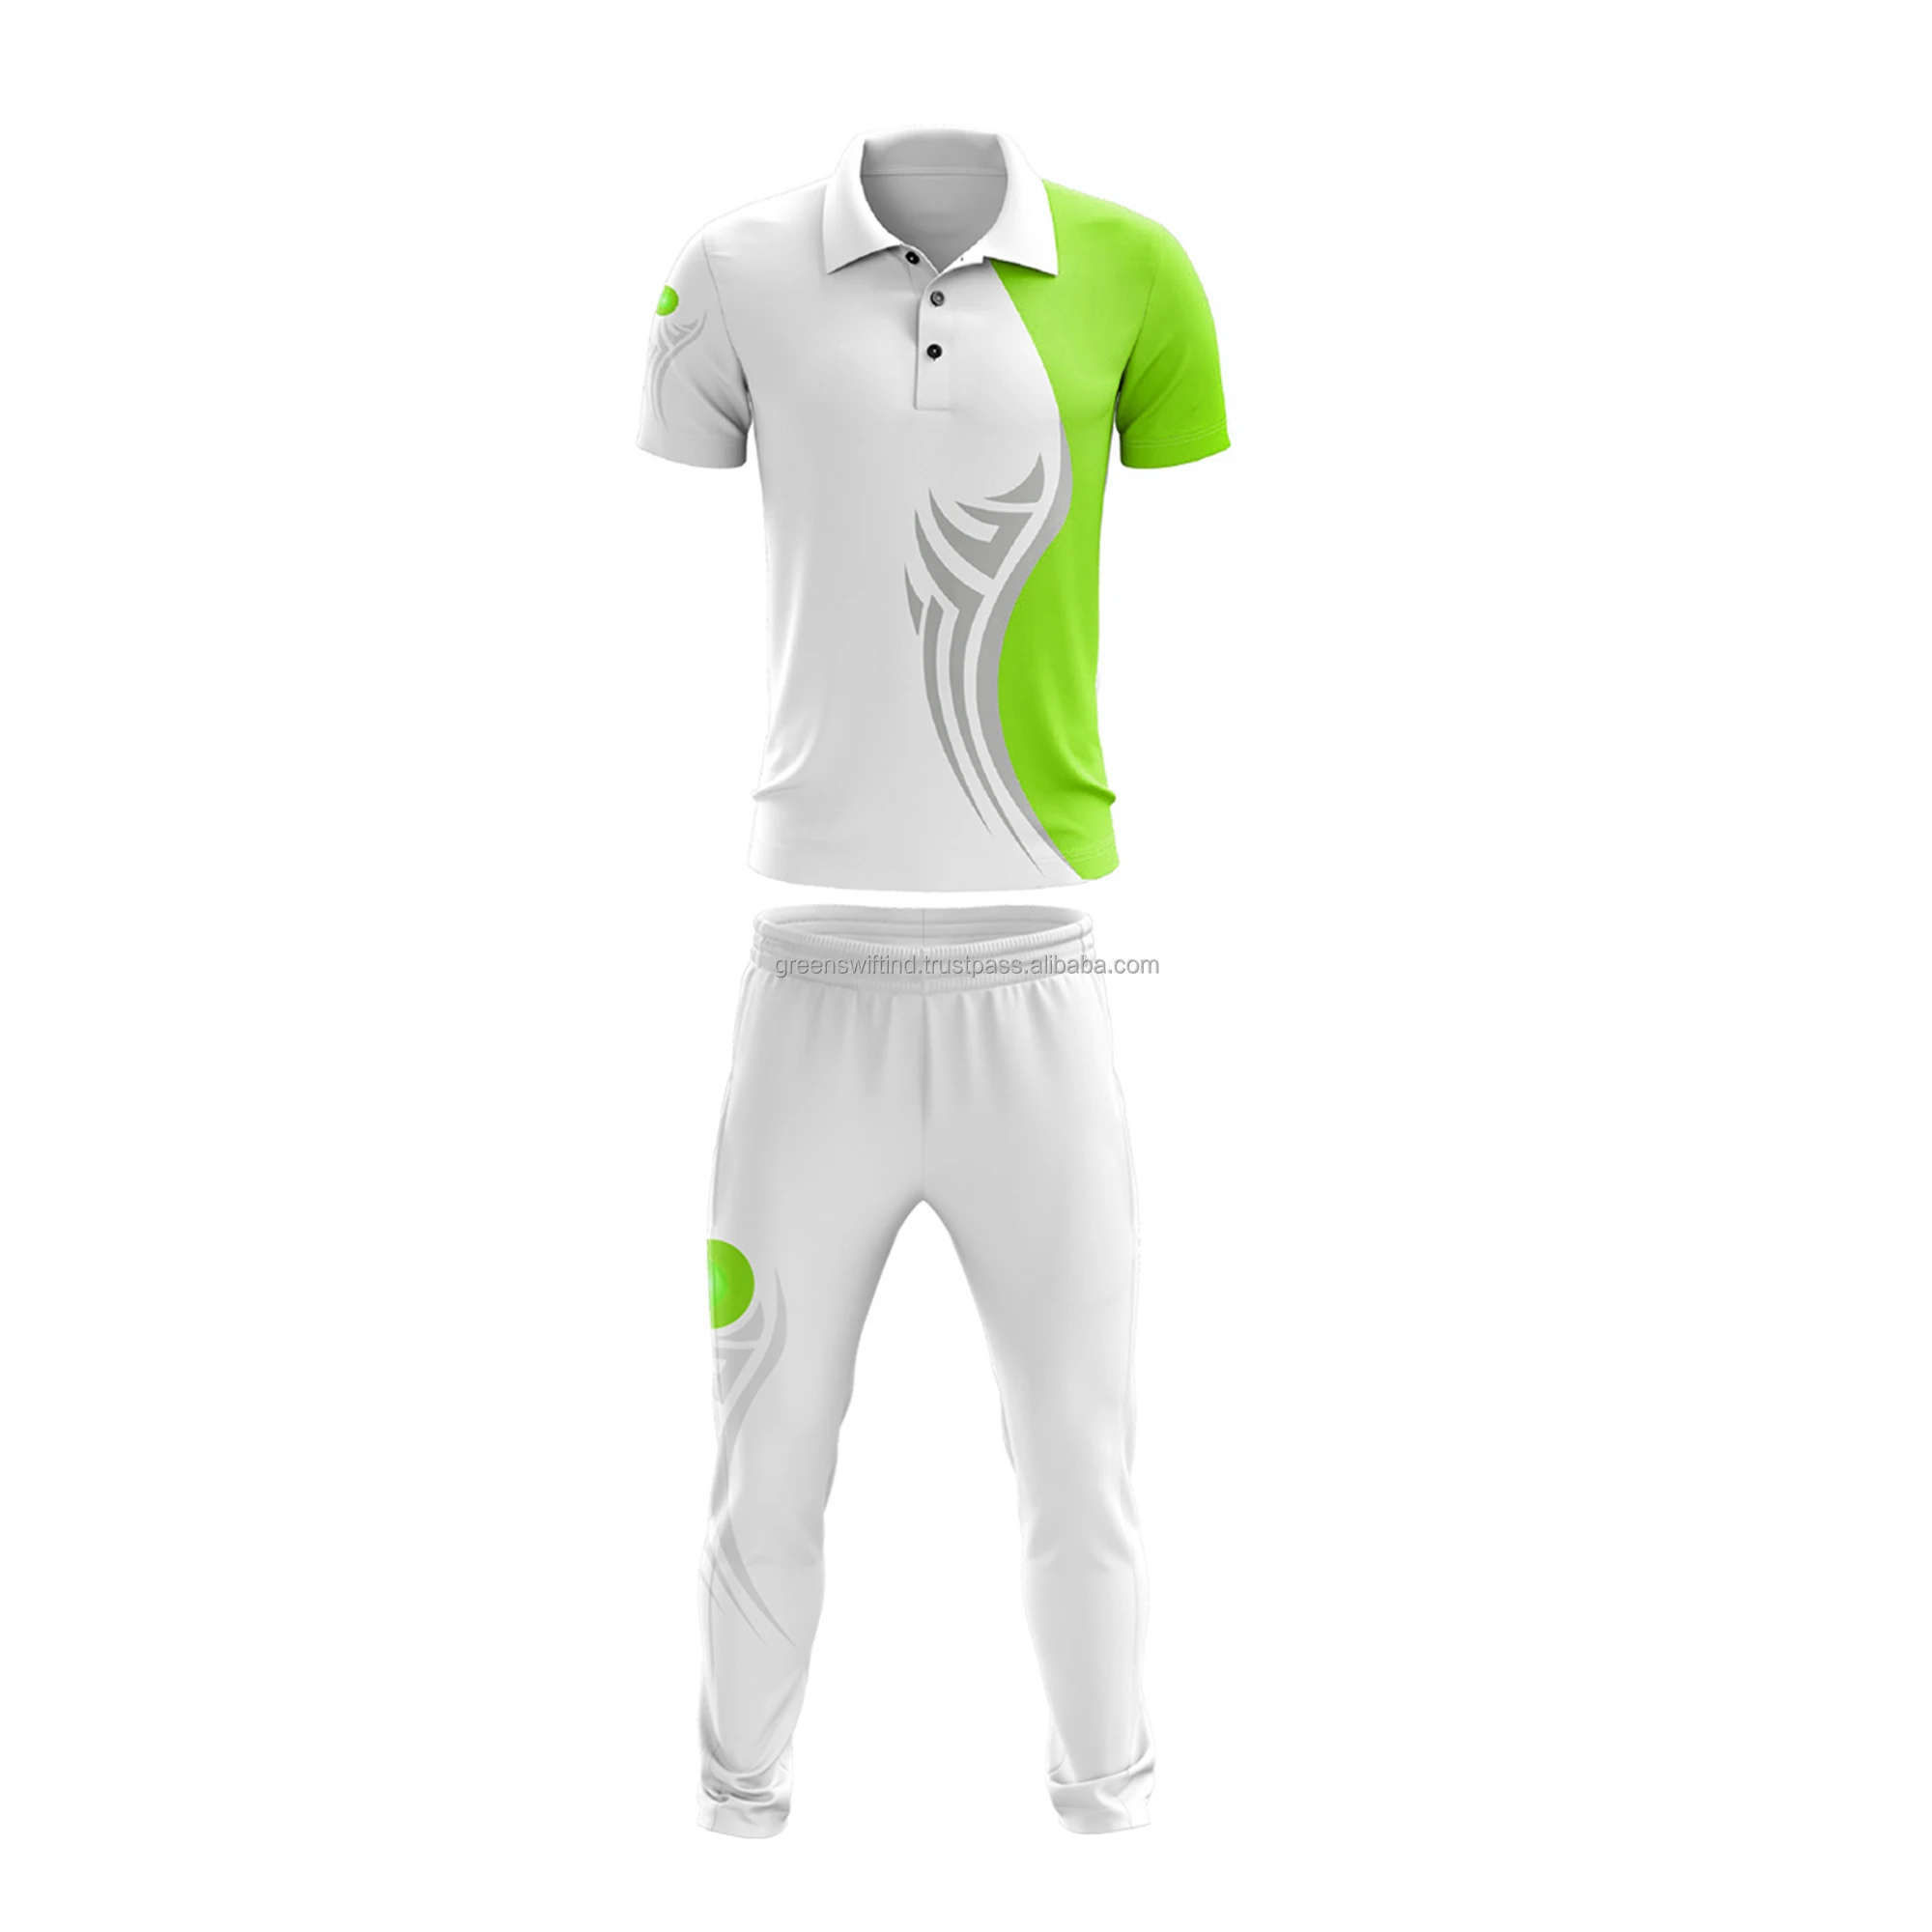 Buy Jersey Design on X: Green and White Star Cricket Jersey